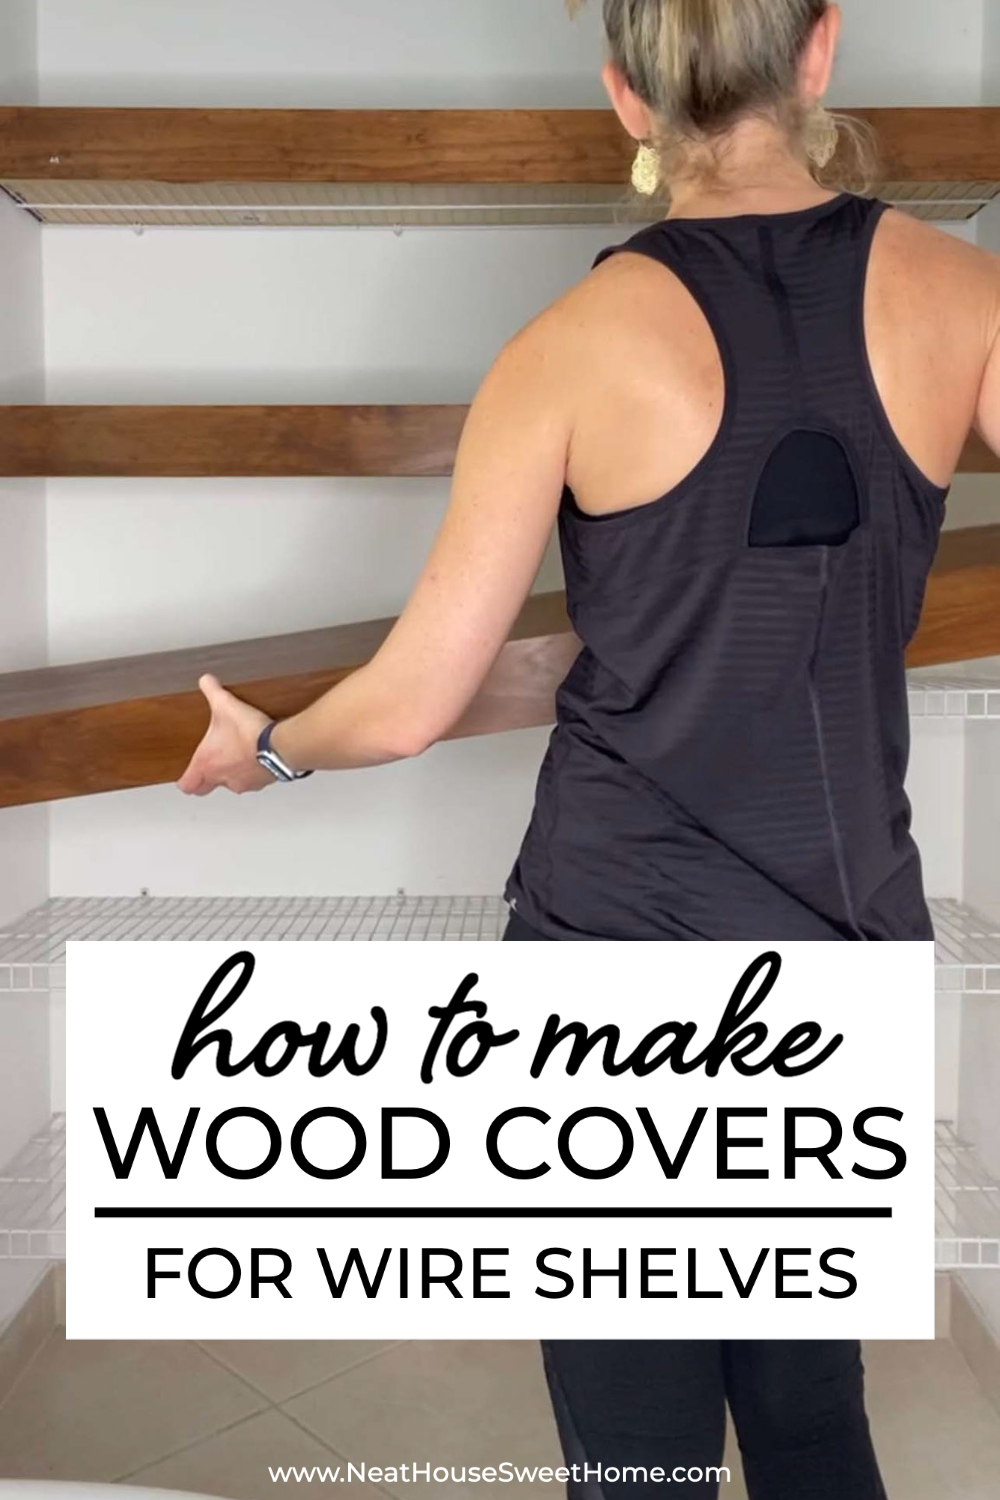 Do you hate those ugly wire shelves in your pantry or closet? Here is how to DIY wood covers to hide ugly wire shelving and give your closet a custom look!